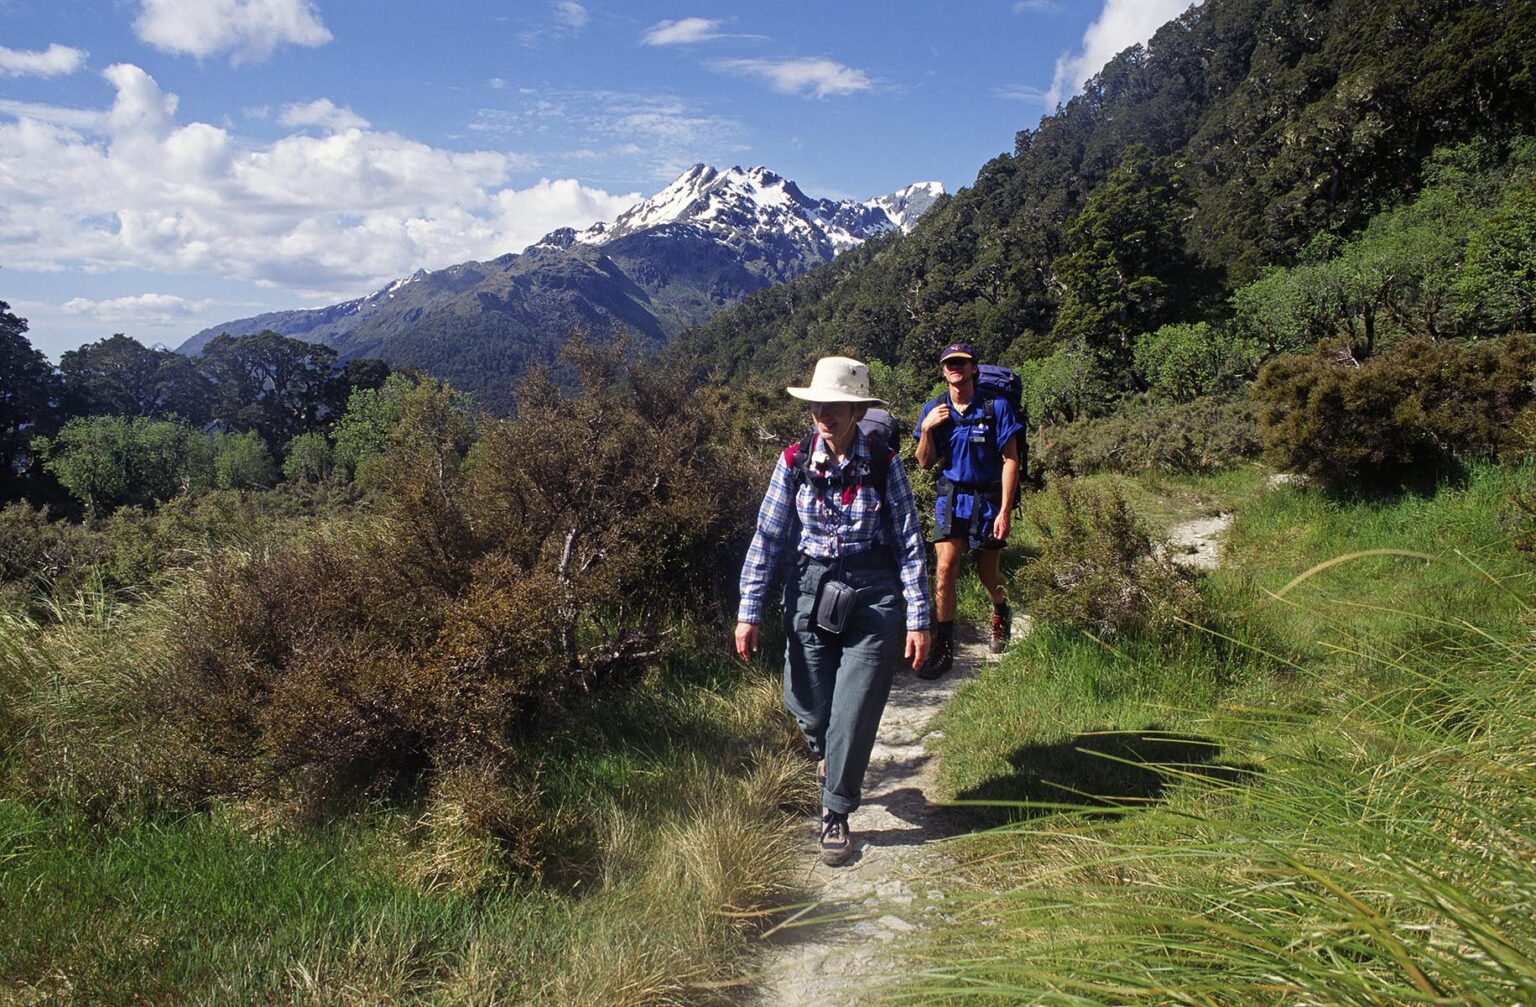 Hikers enjoy a beautiful day along the ROUTEBURN TRACK - FIORDLAND NATIONAL PARK, SOUTH ISLAND